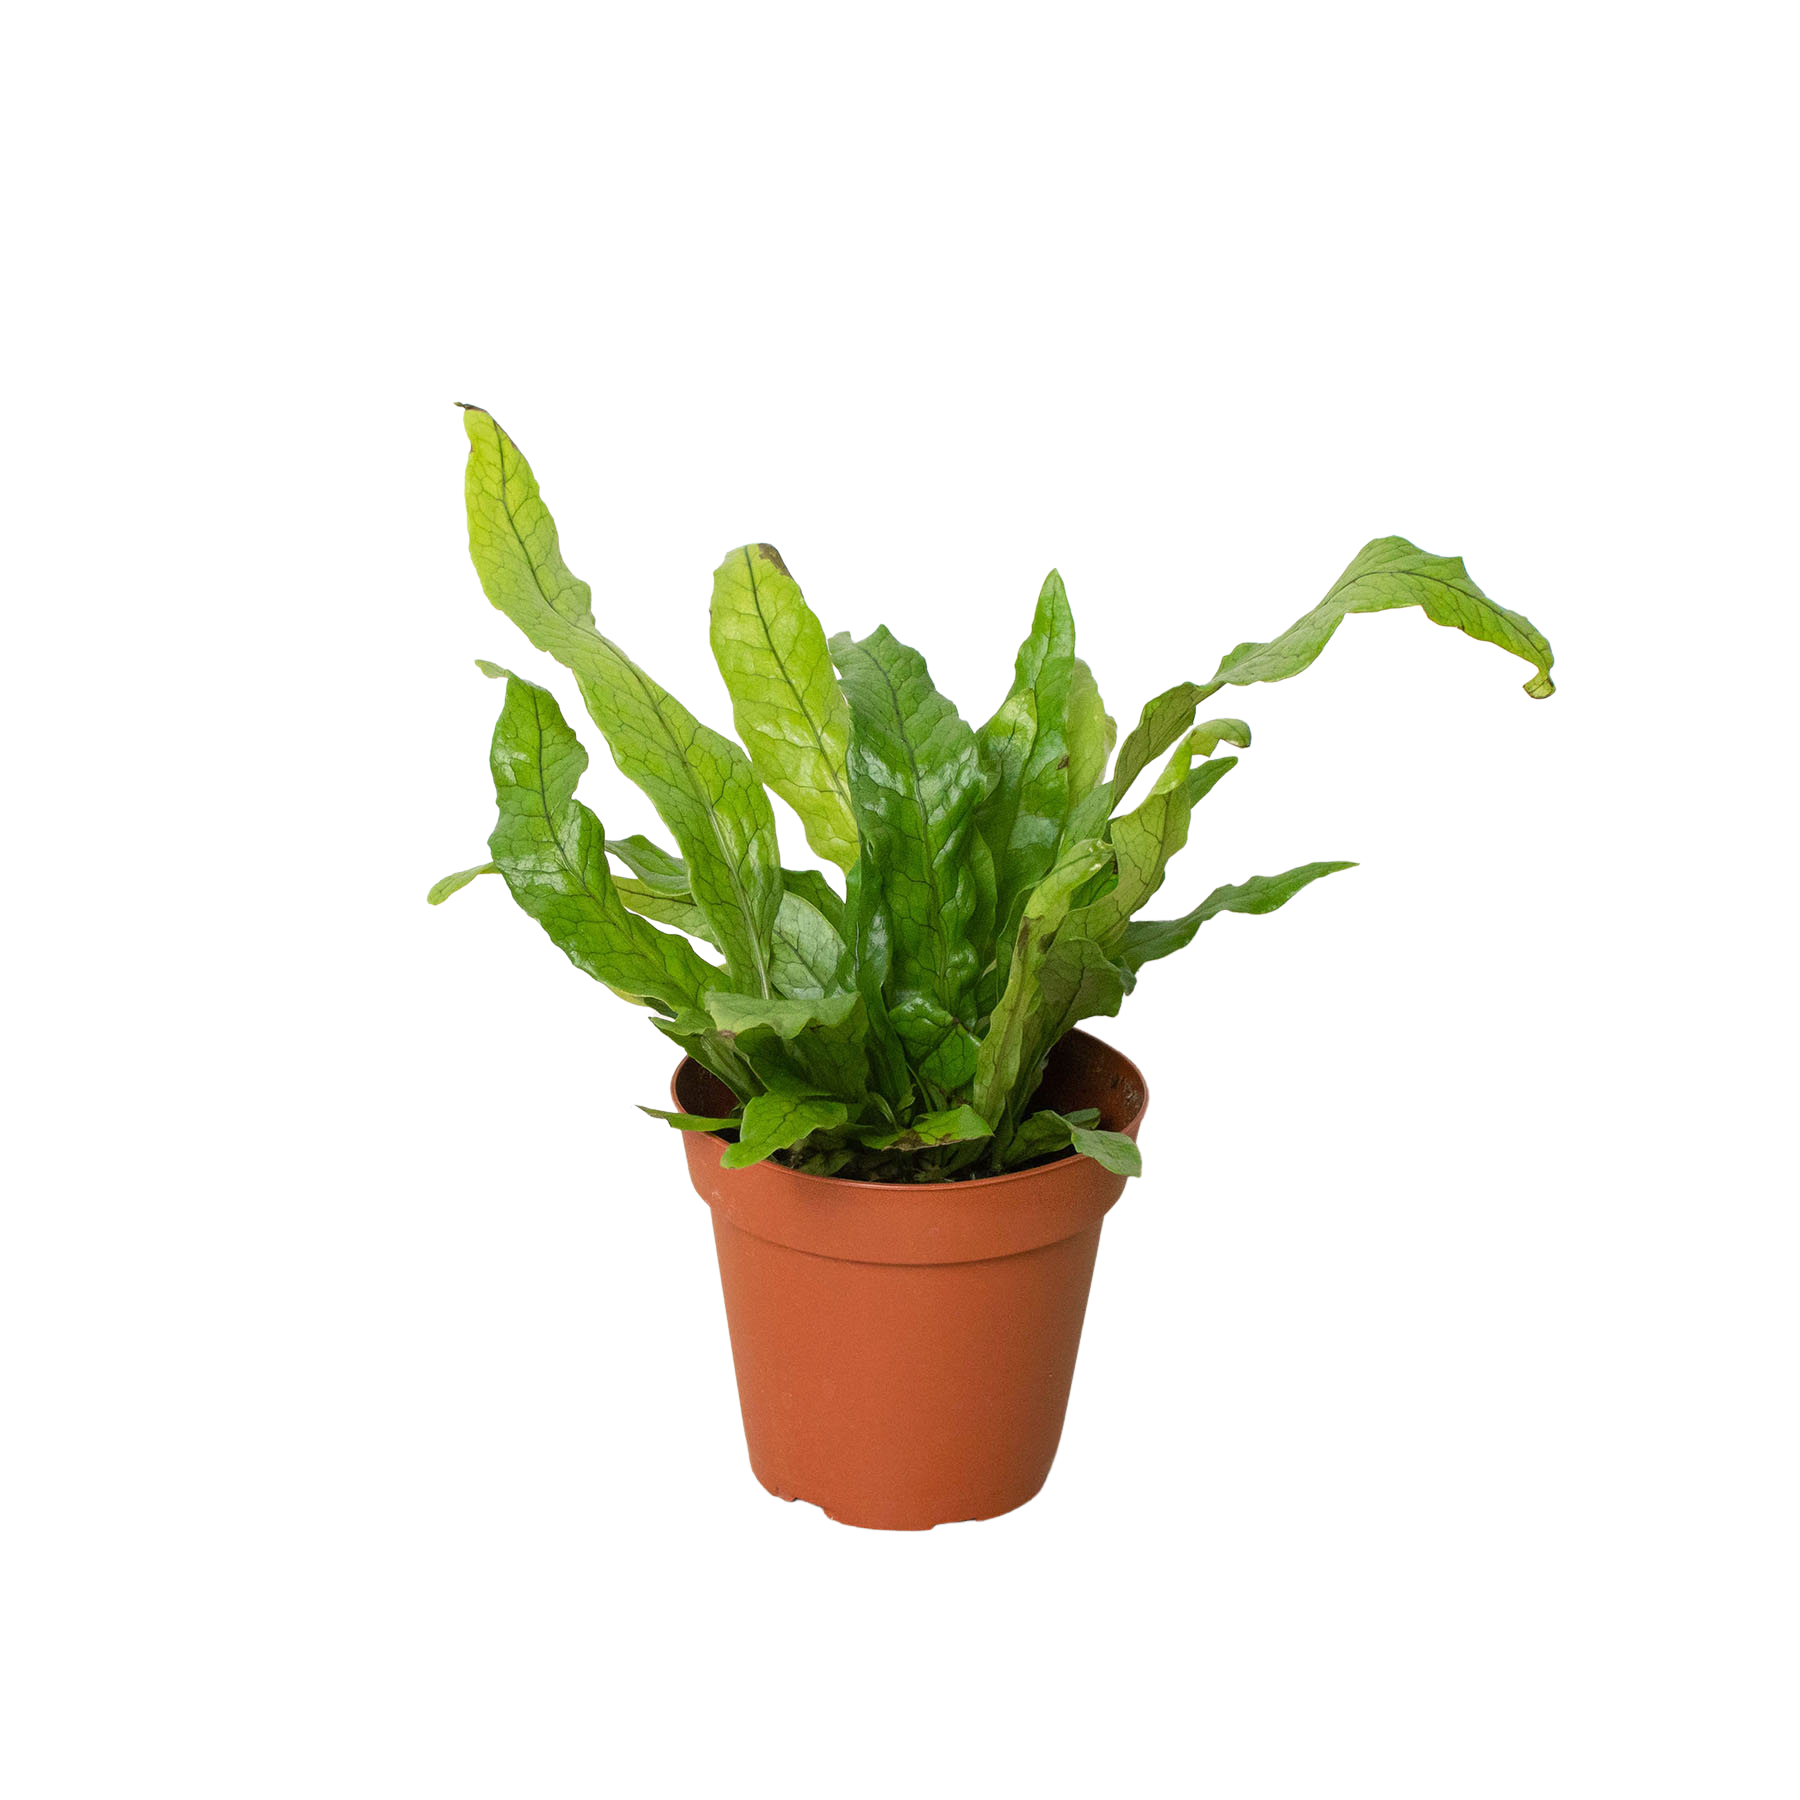 A small plant in a pot on a white background, available at the best garden center near me.